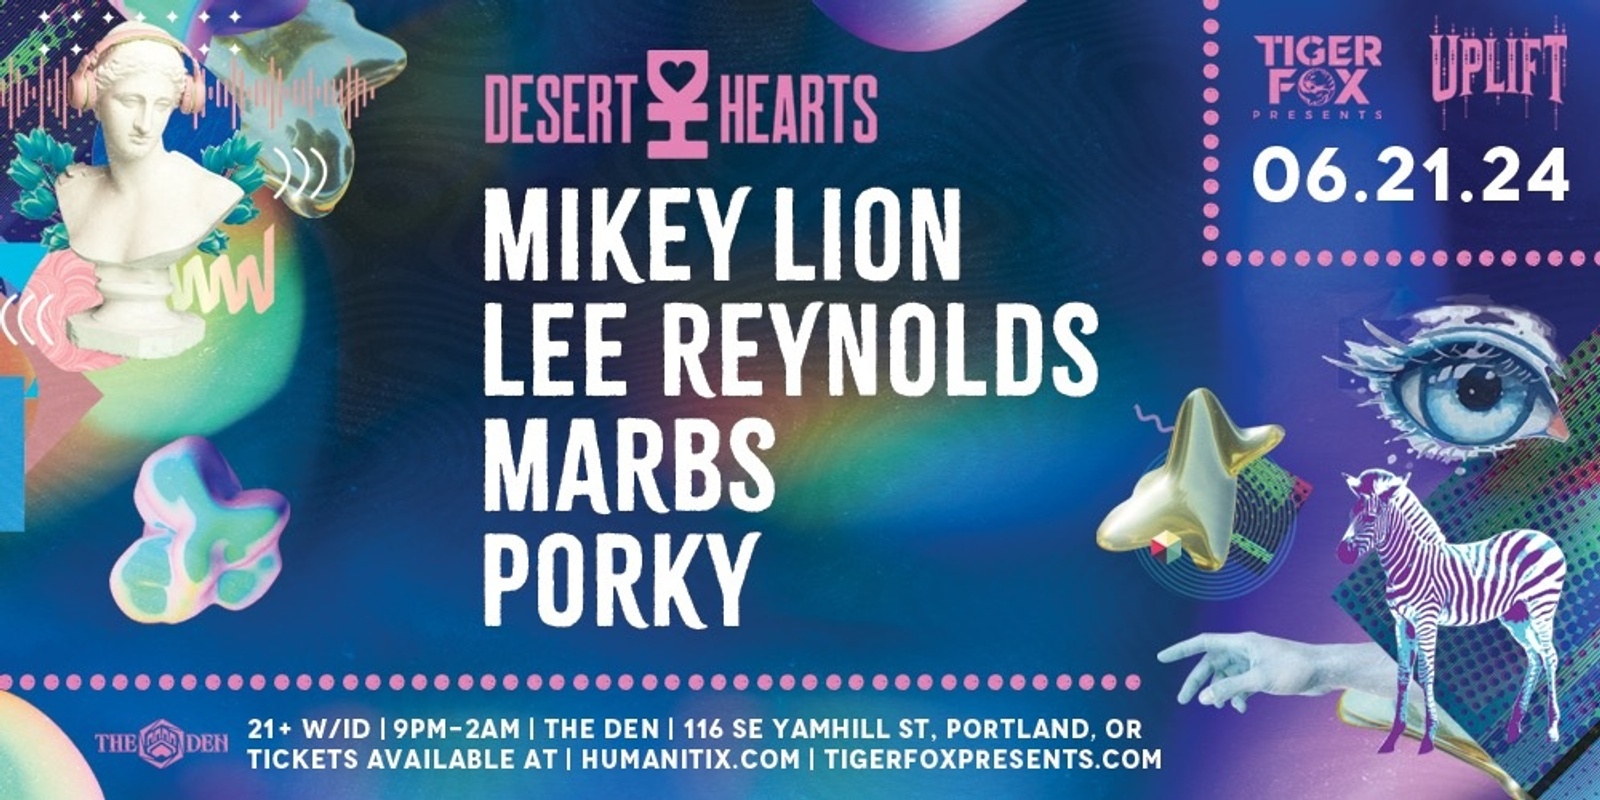 Banner image for Desert Hearts Takeover TICKETS AVAILABLE @ door! 